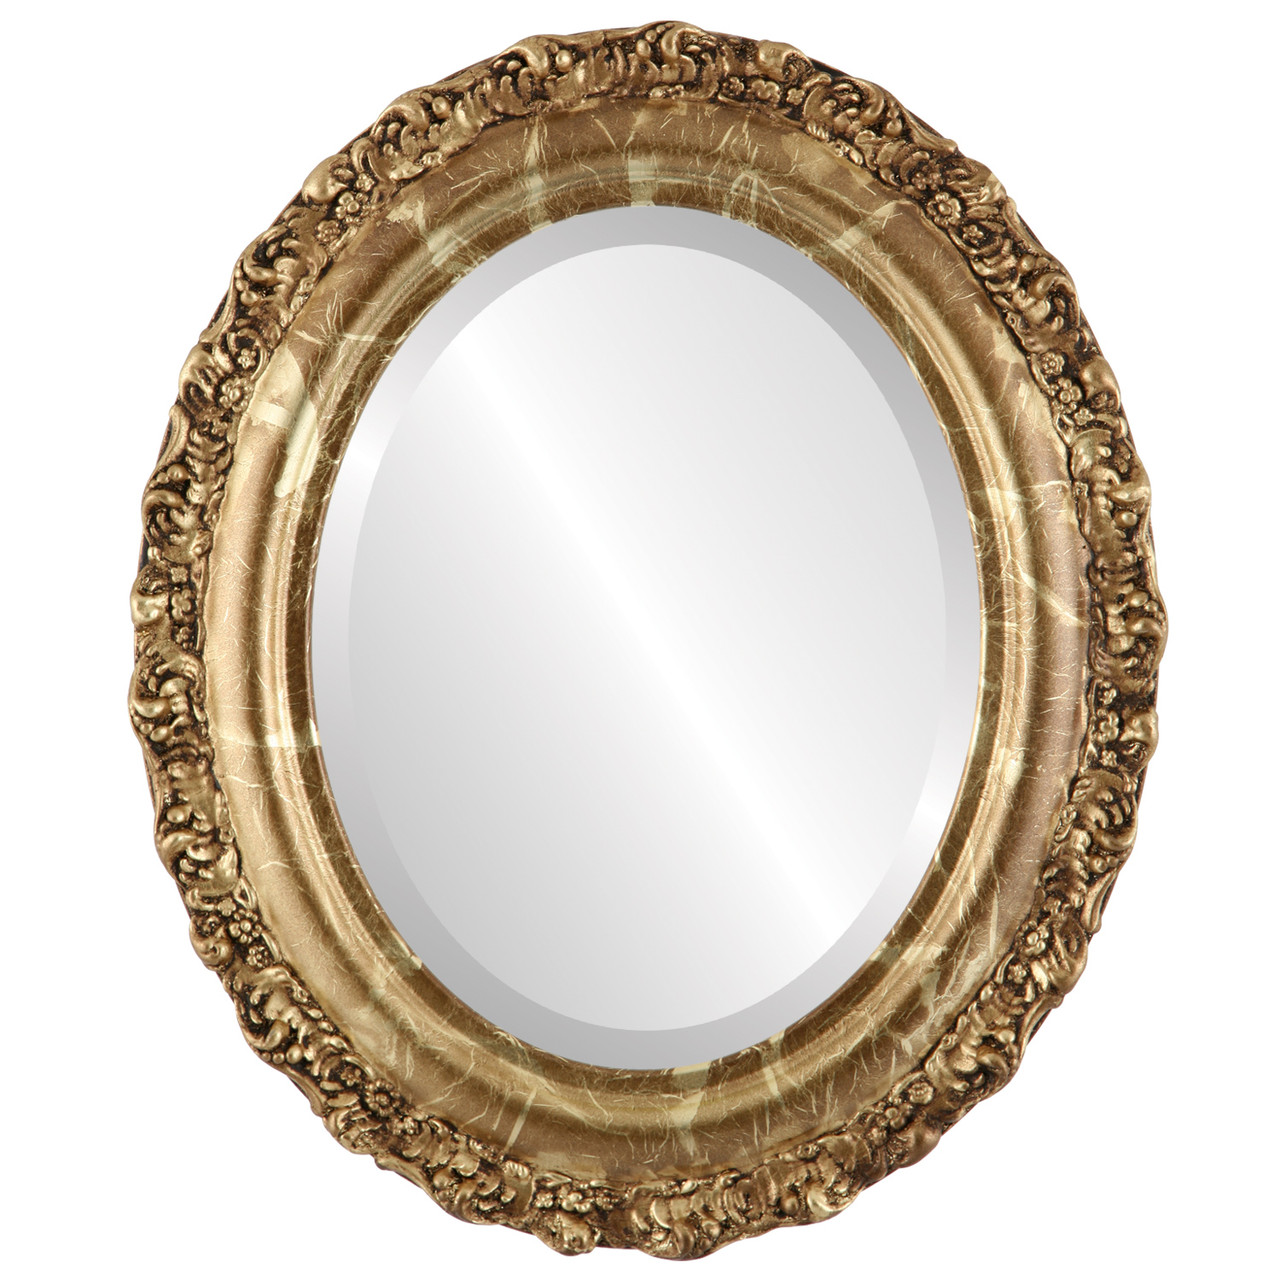 Decorative Gold Oval Mirrors from $177 Free Shipping